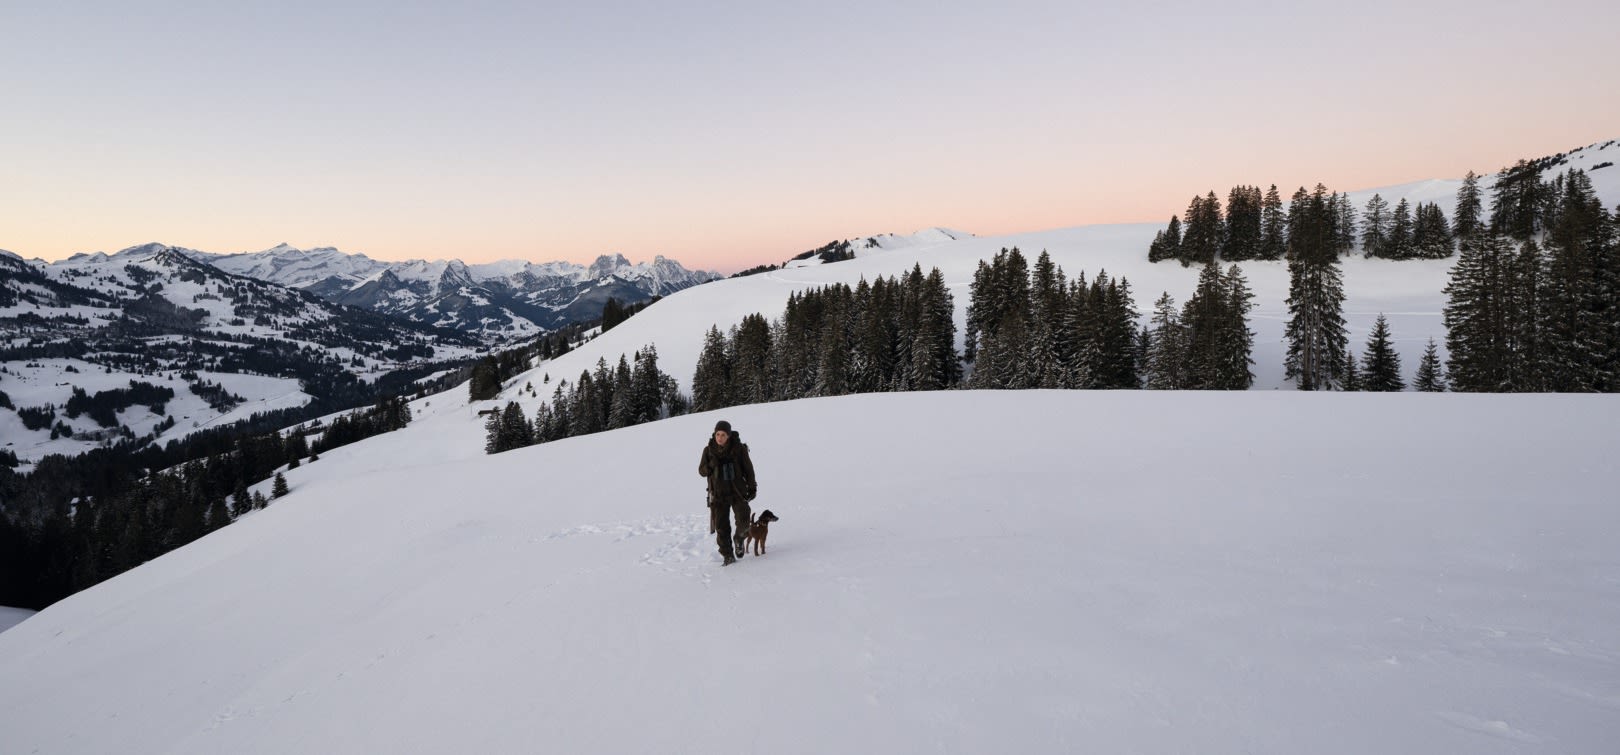 Renate Fahrni - huntress walking in the snowy Swiss mountains with her dog